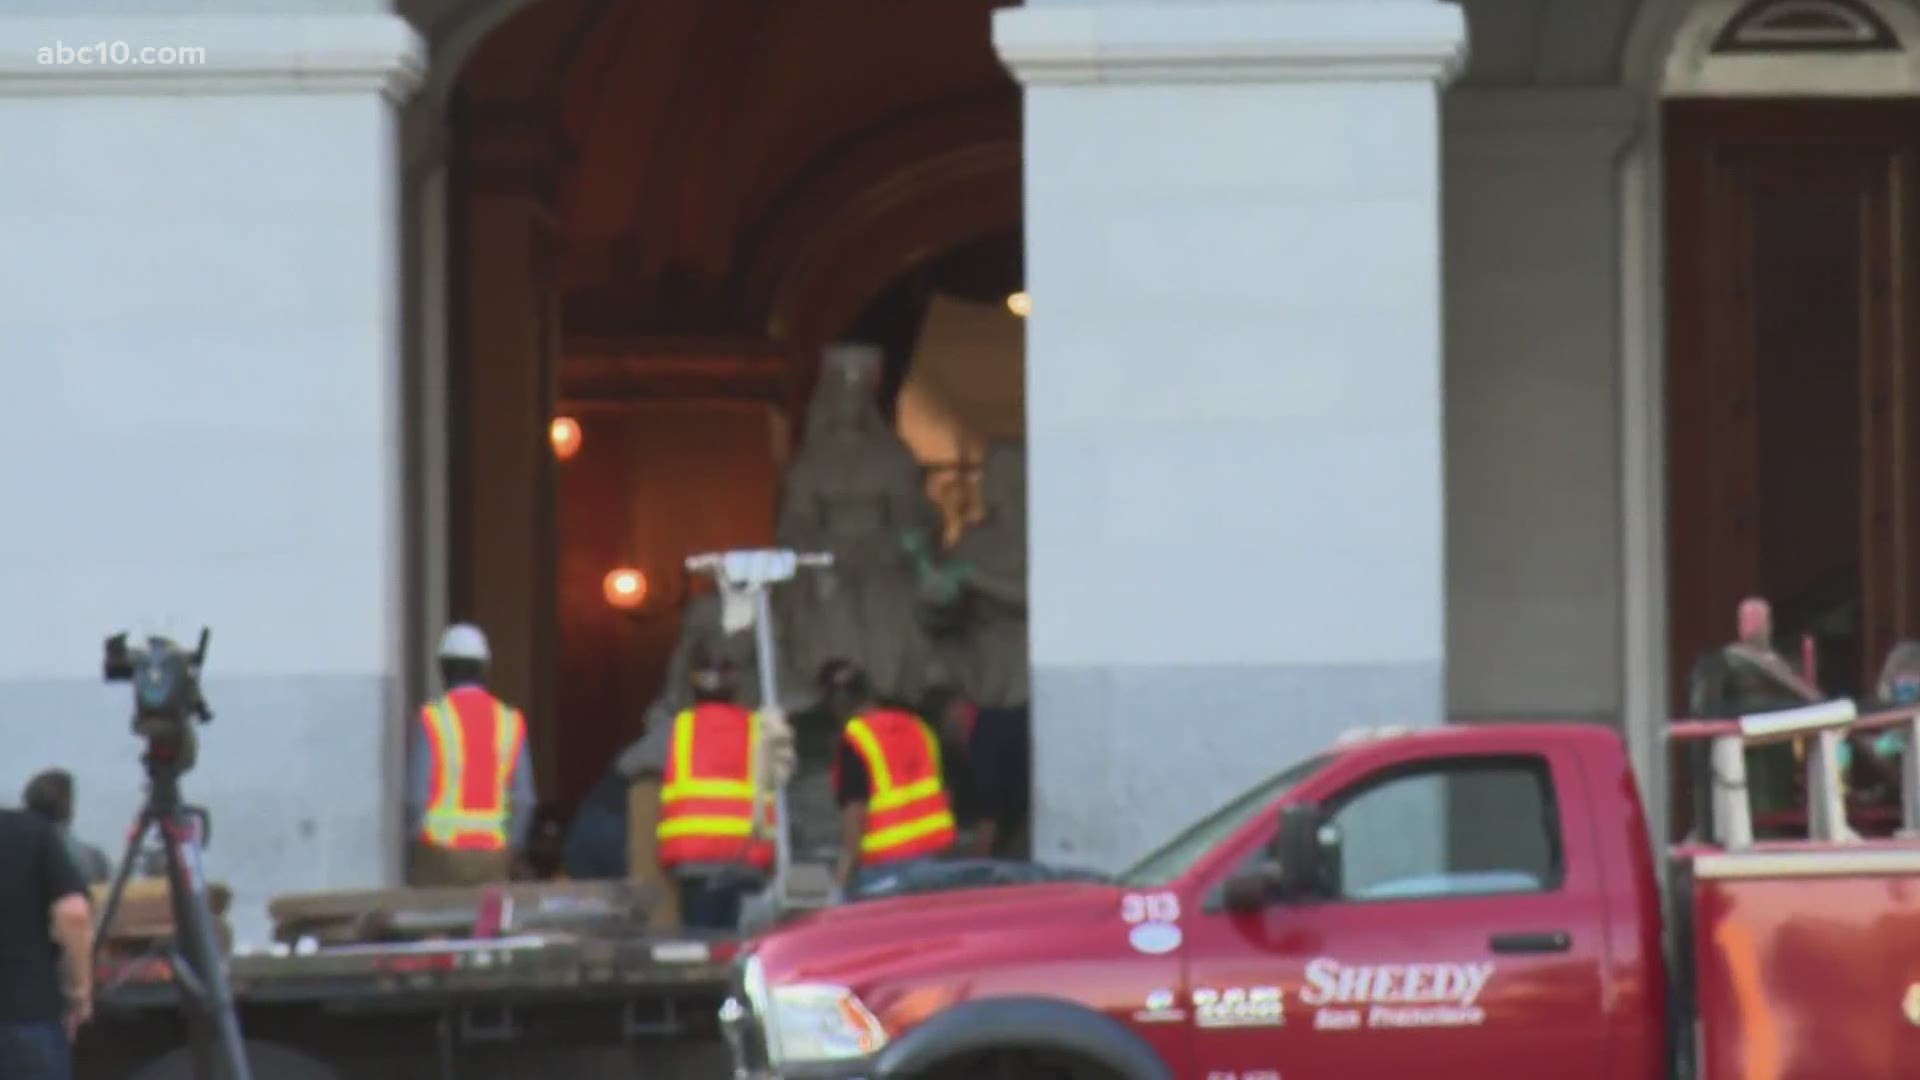 Columbus statue being removed at California State Capitol